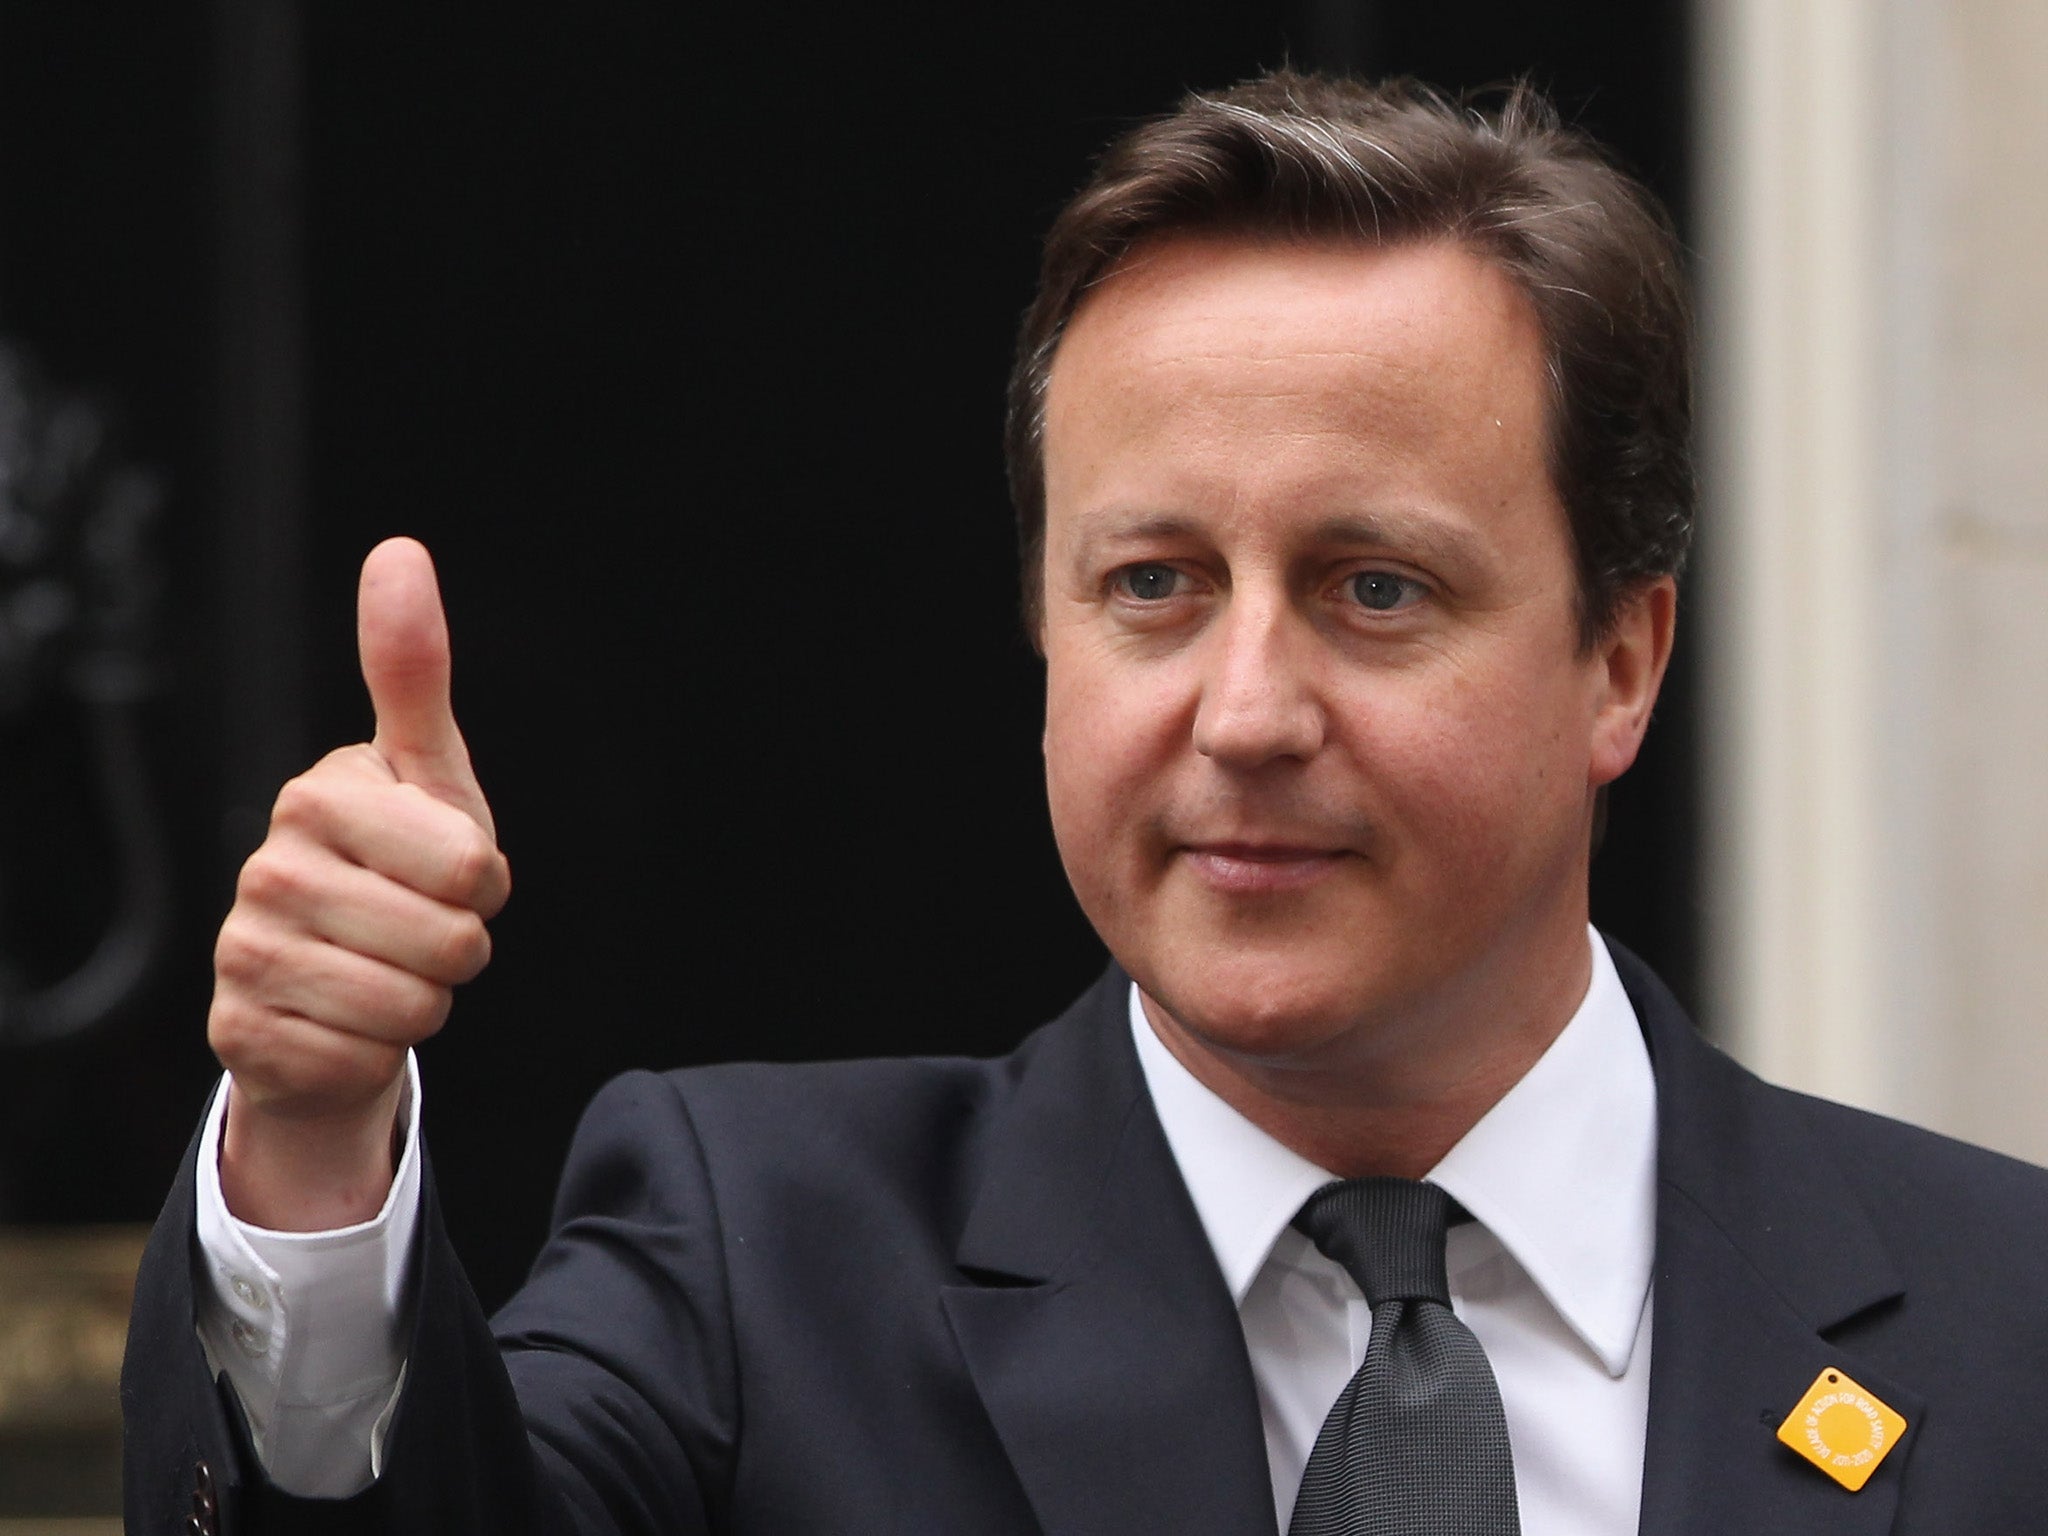 Thumbs up: David Cameron's team have paid for Facebook adverts in order to get the PM more 'likes' on the social network